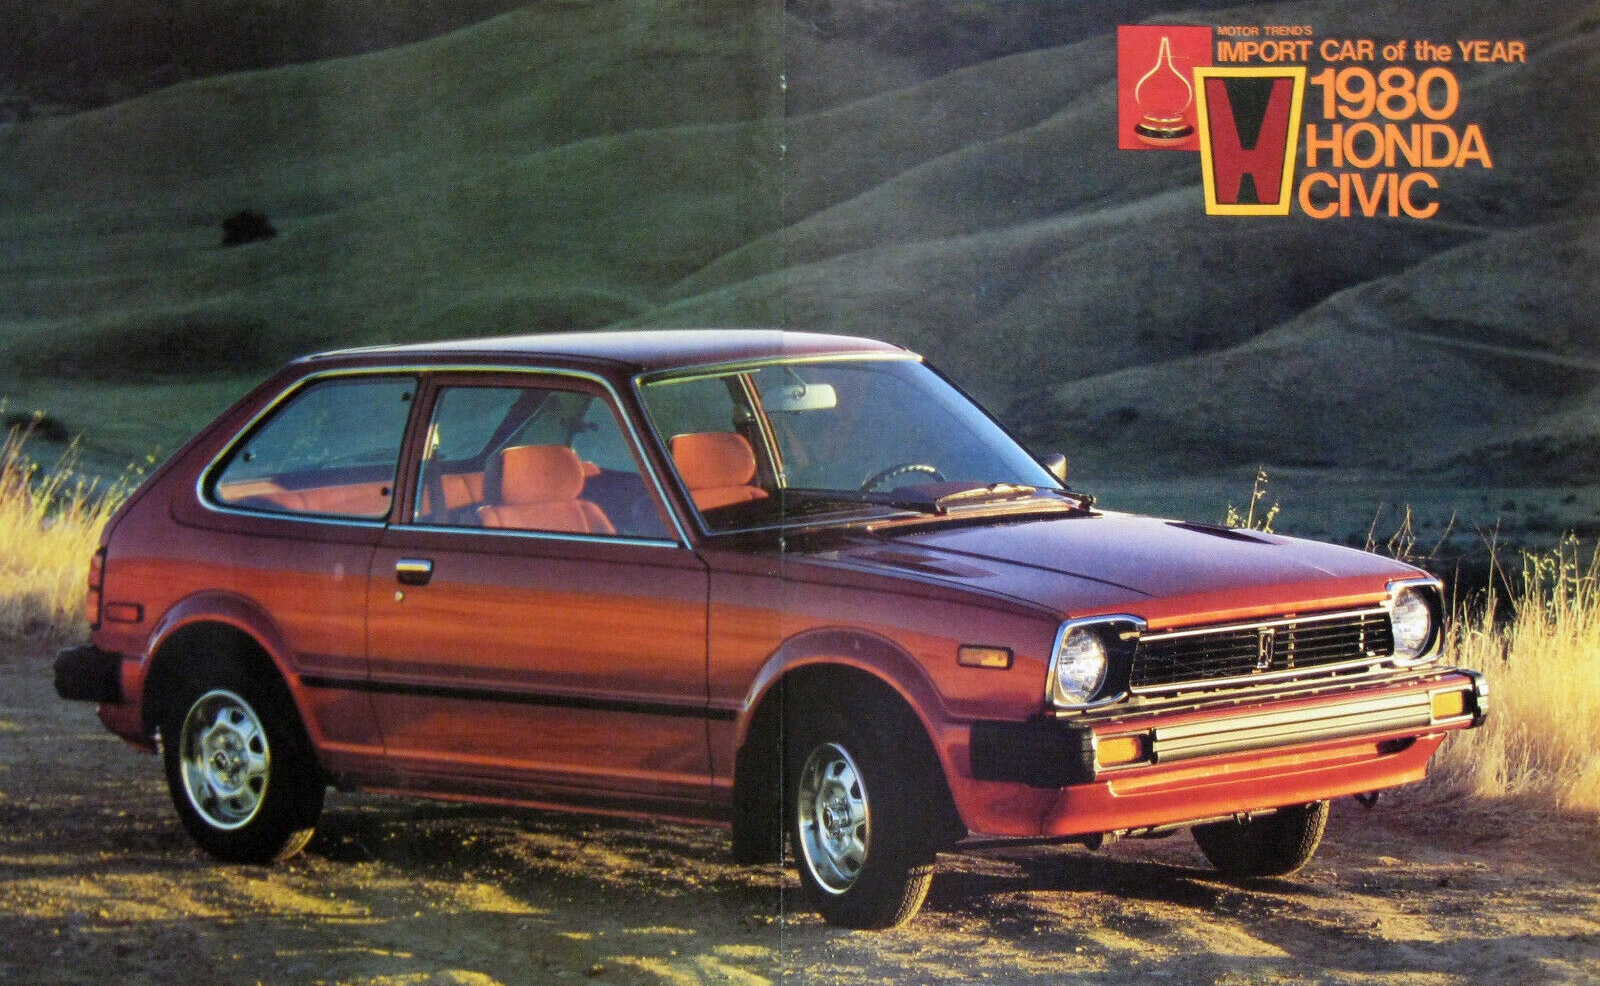 Motor Trend named the 1980 Civic as "import car of the year."